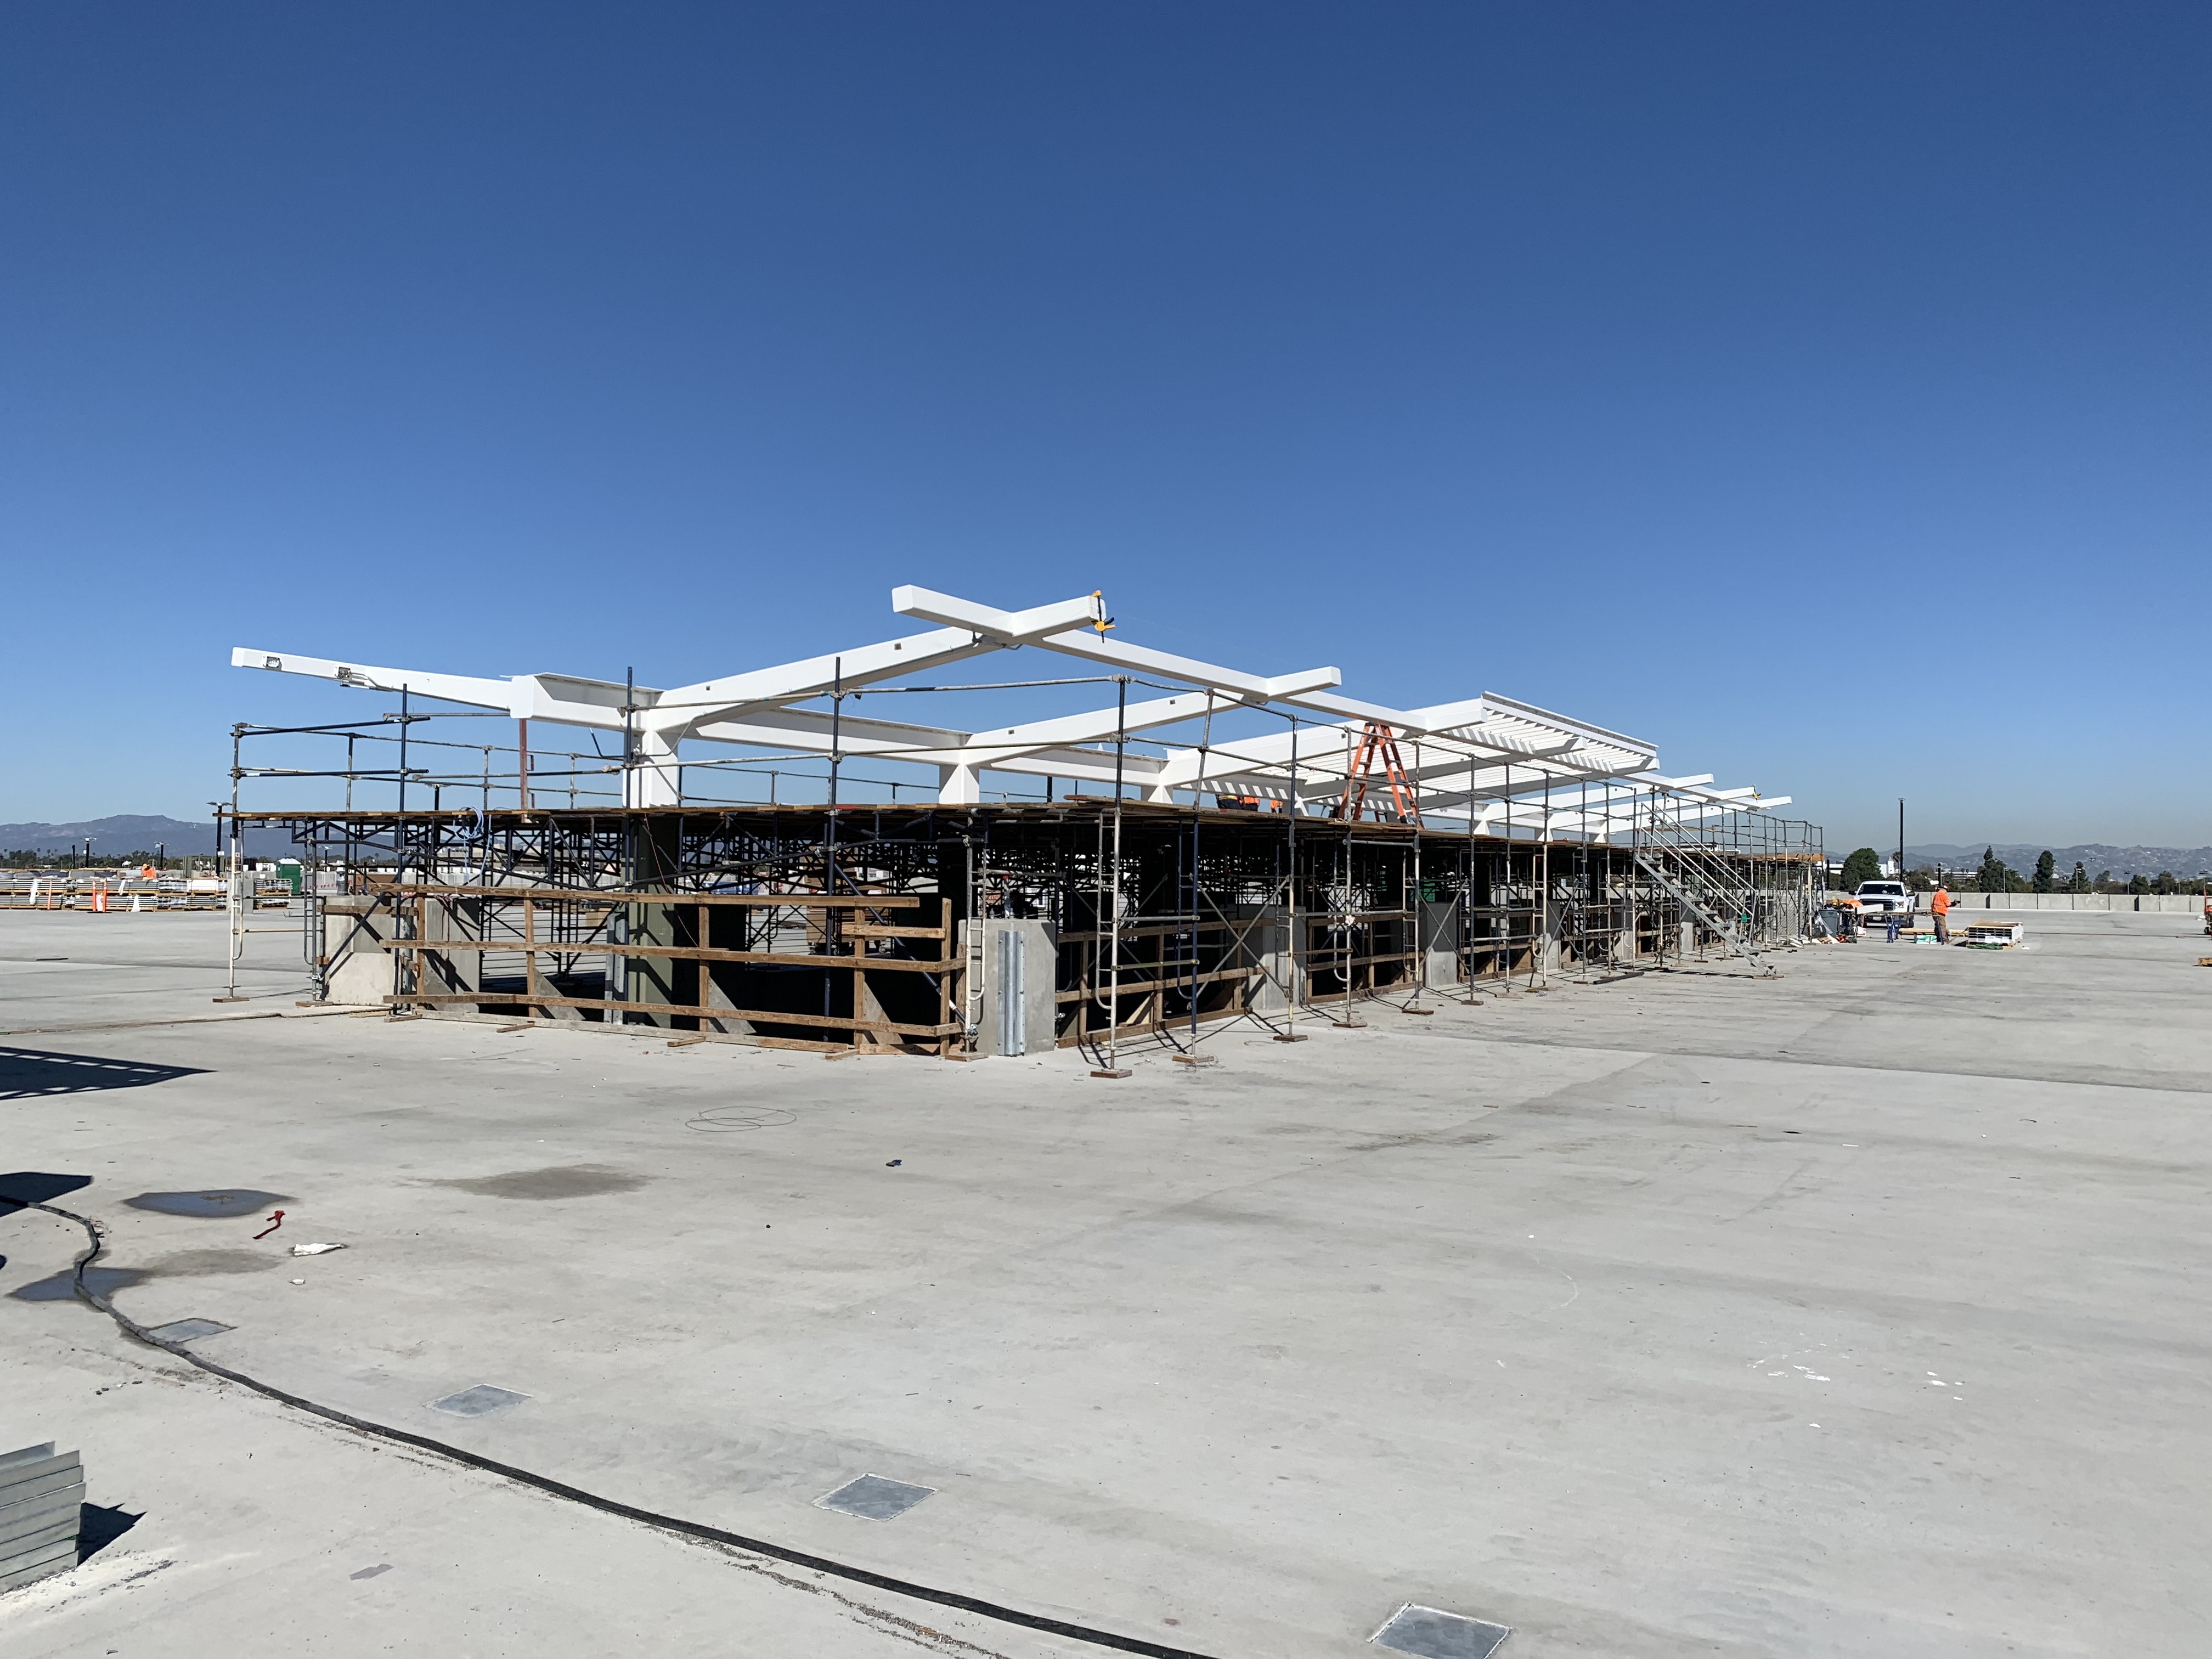 A rooftop view of the escalator canopy construction on the Intermodal Transportation Facility-West.